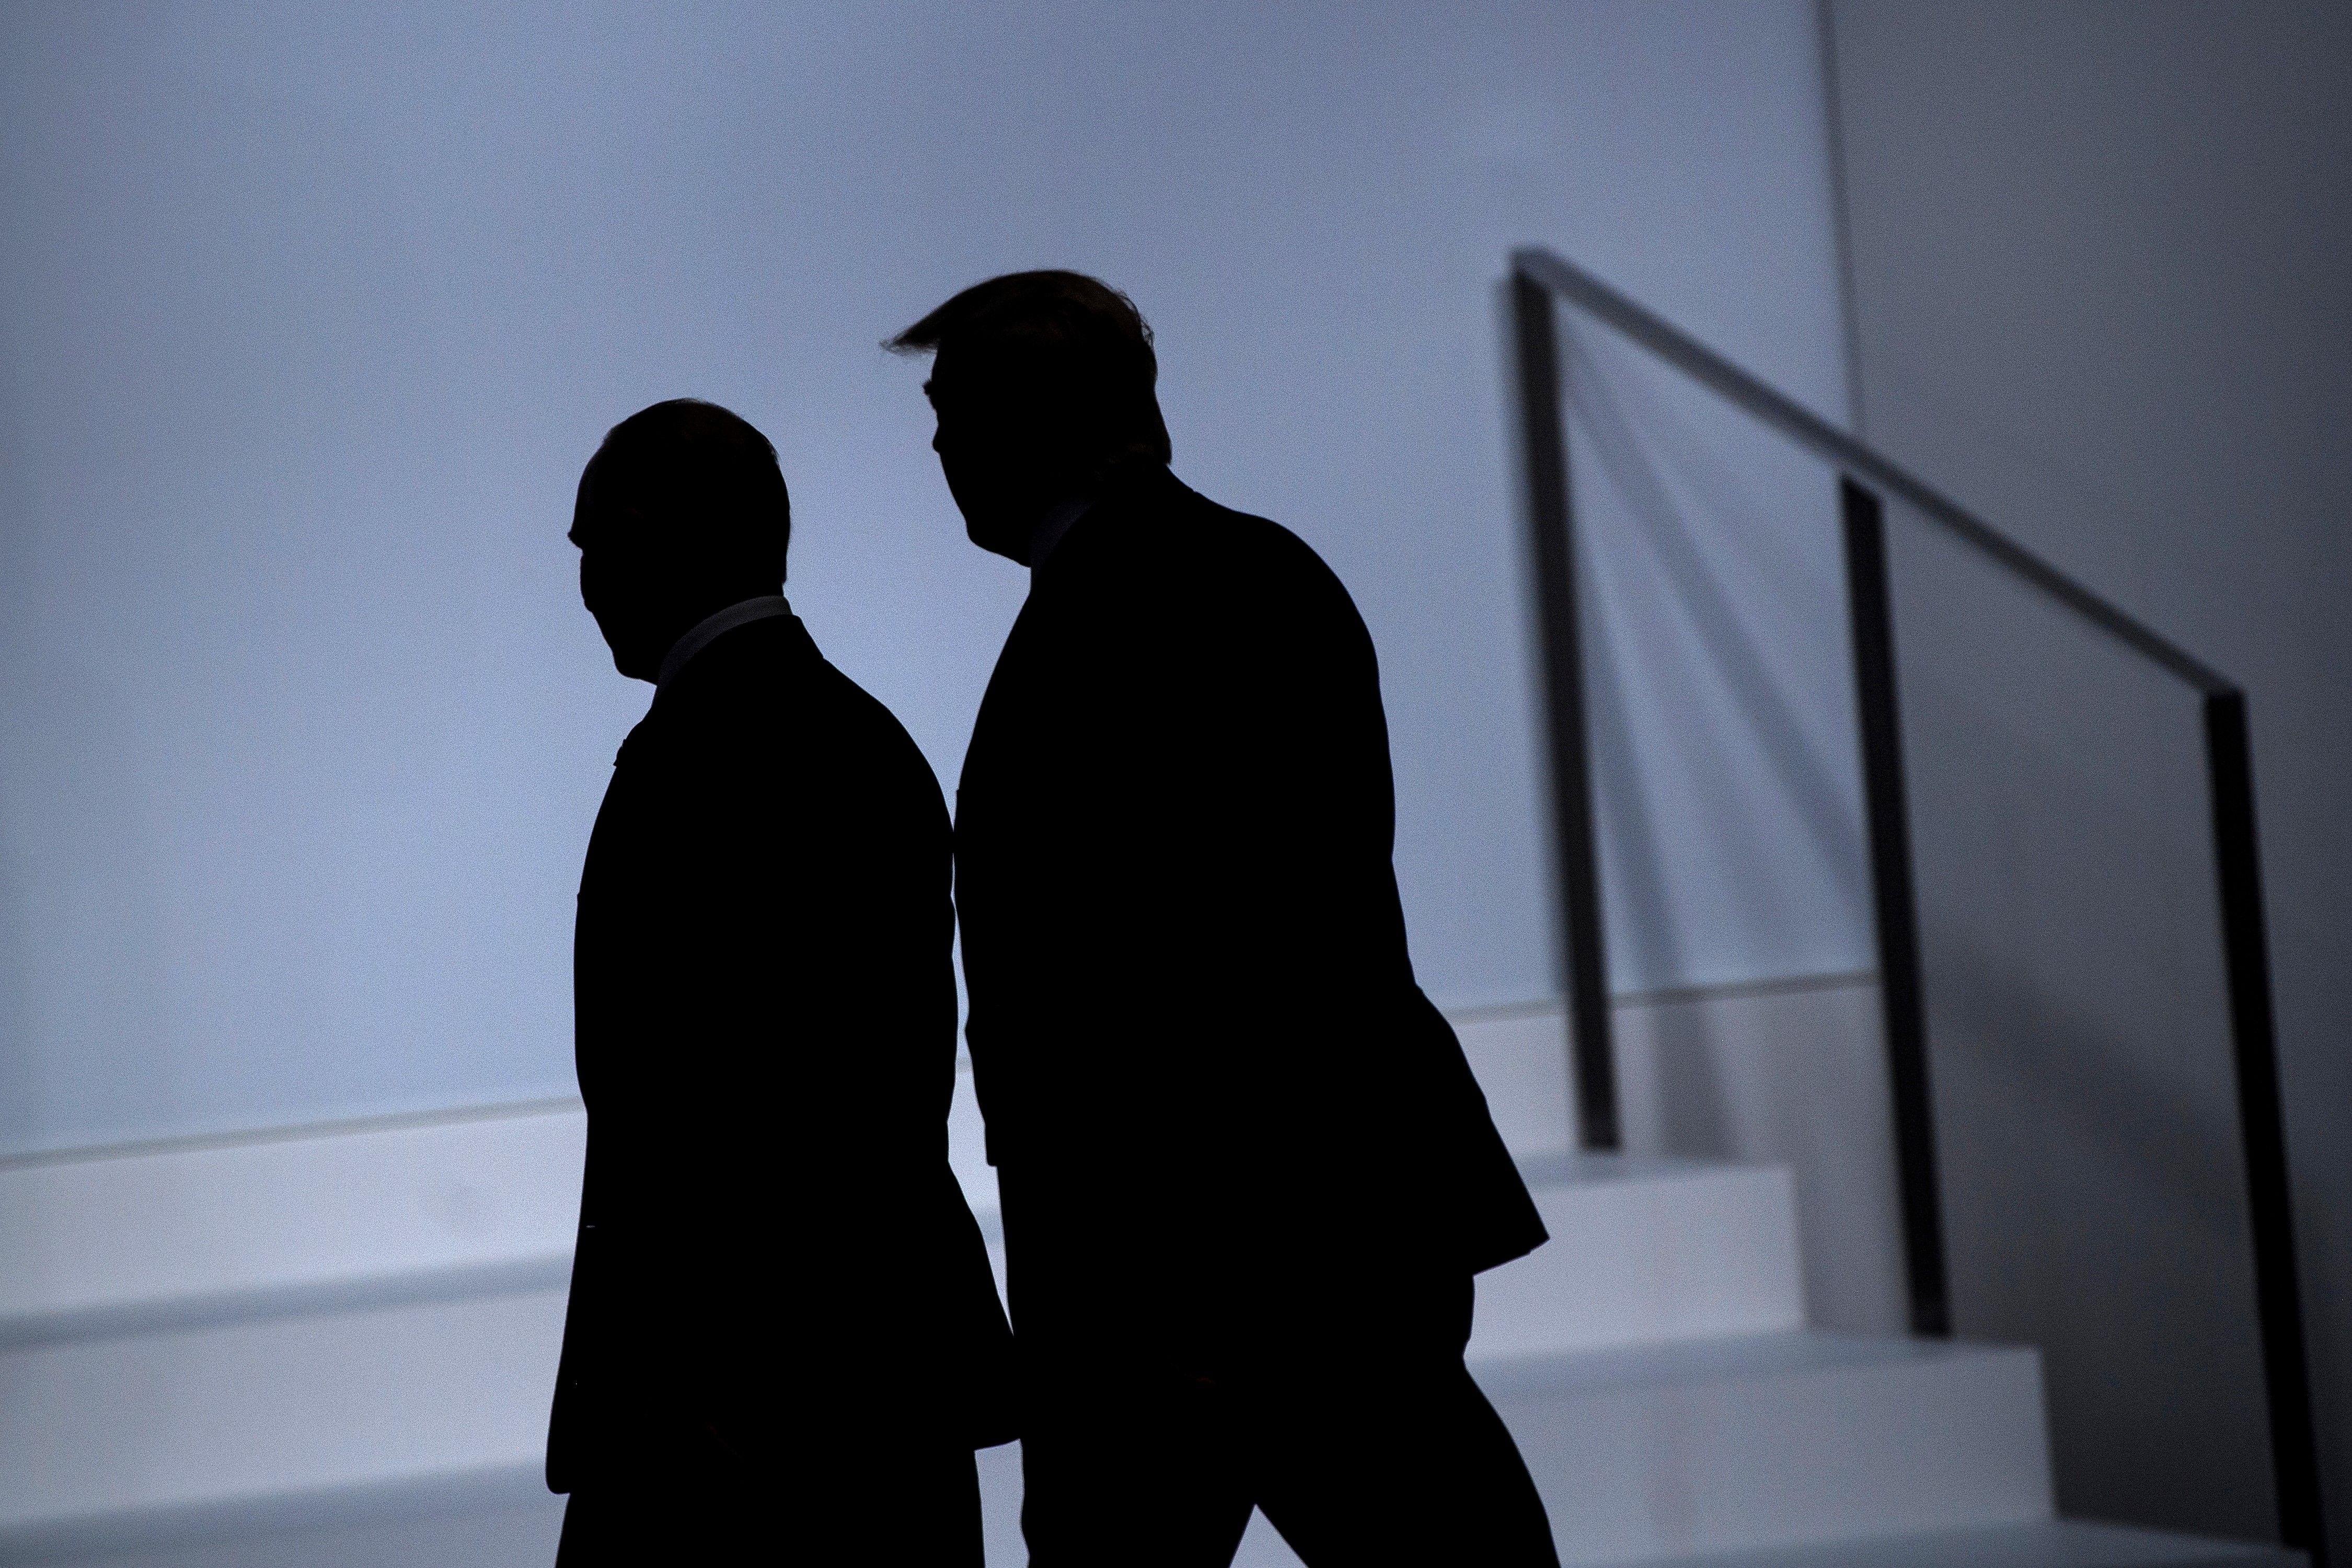 Trump and Putin walking together, seen in silhouette.